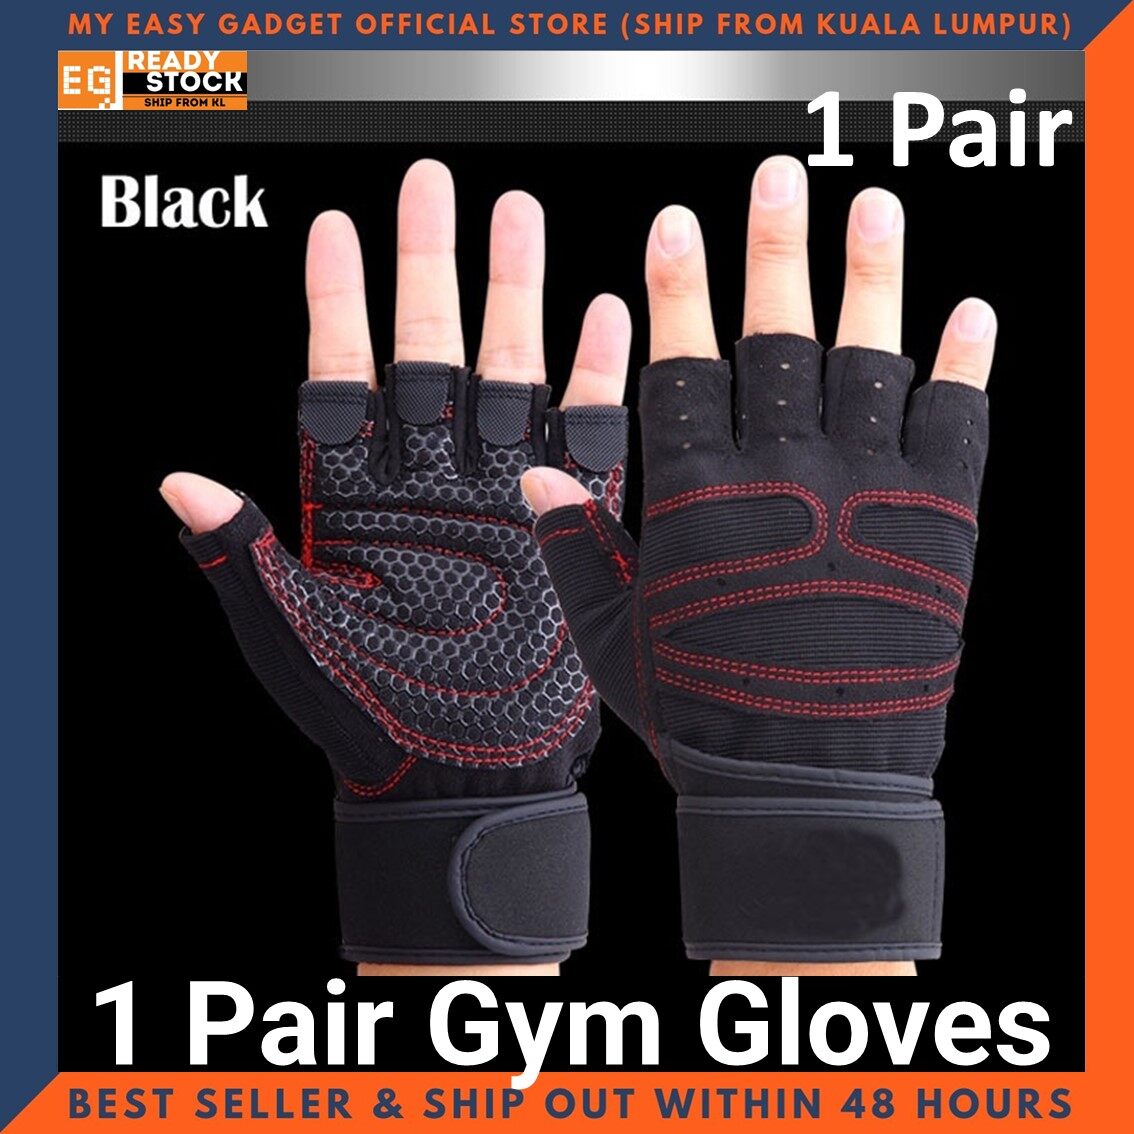 1 Pair Gym Gloves Sports Exercise Weight Lifting Training Fitness Outdoor Motorcycle Cycling Glove